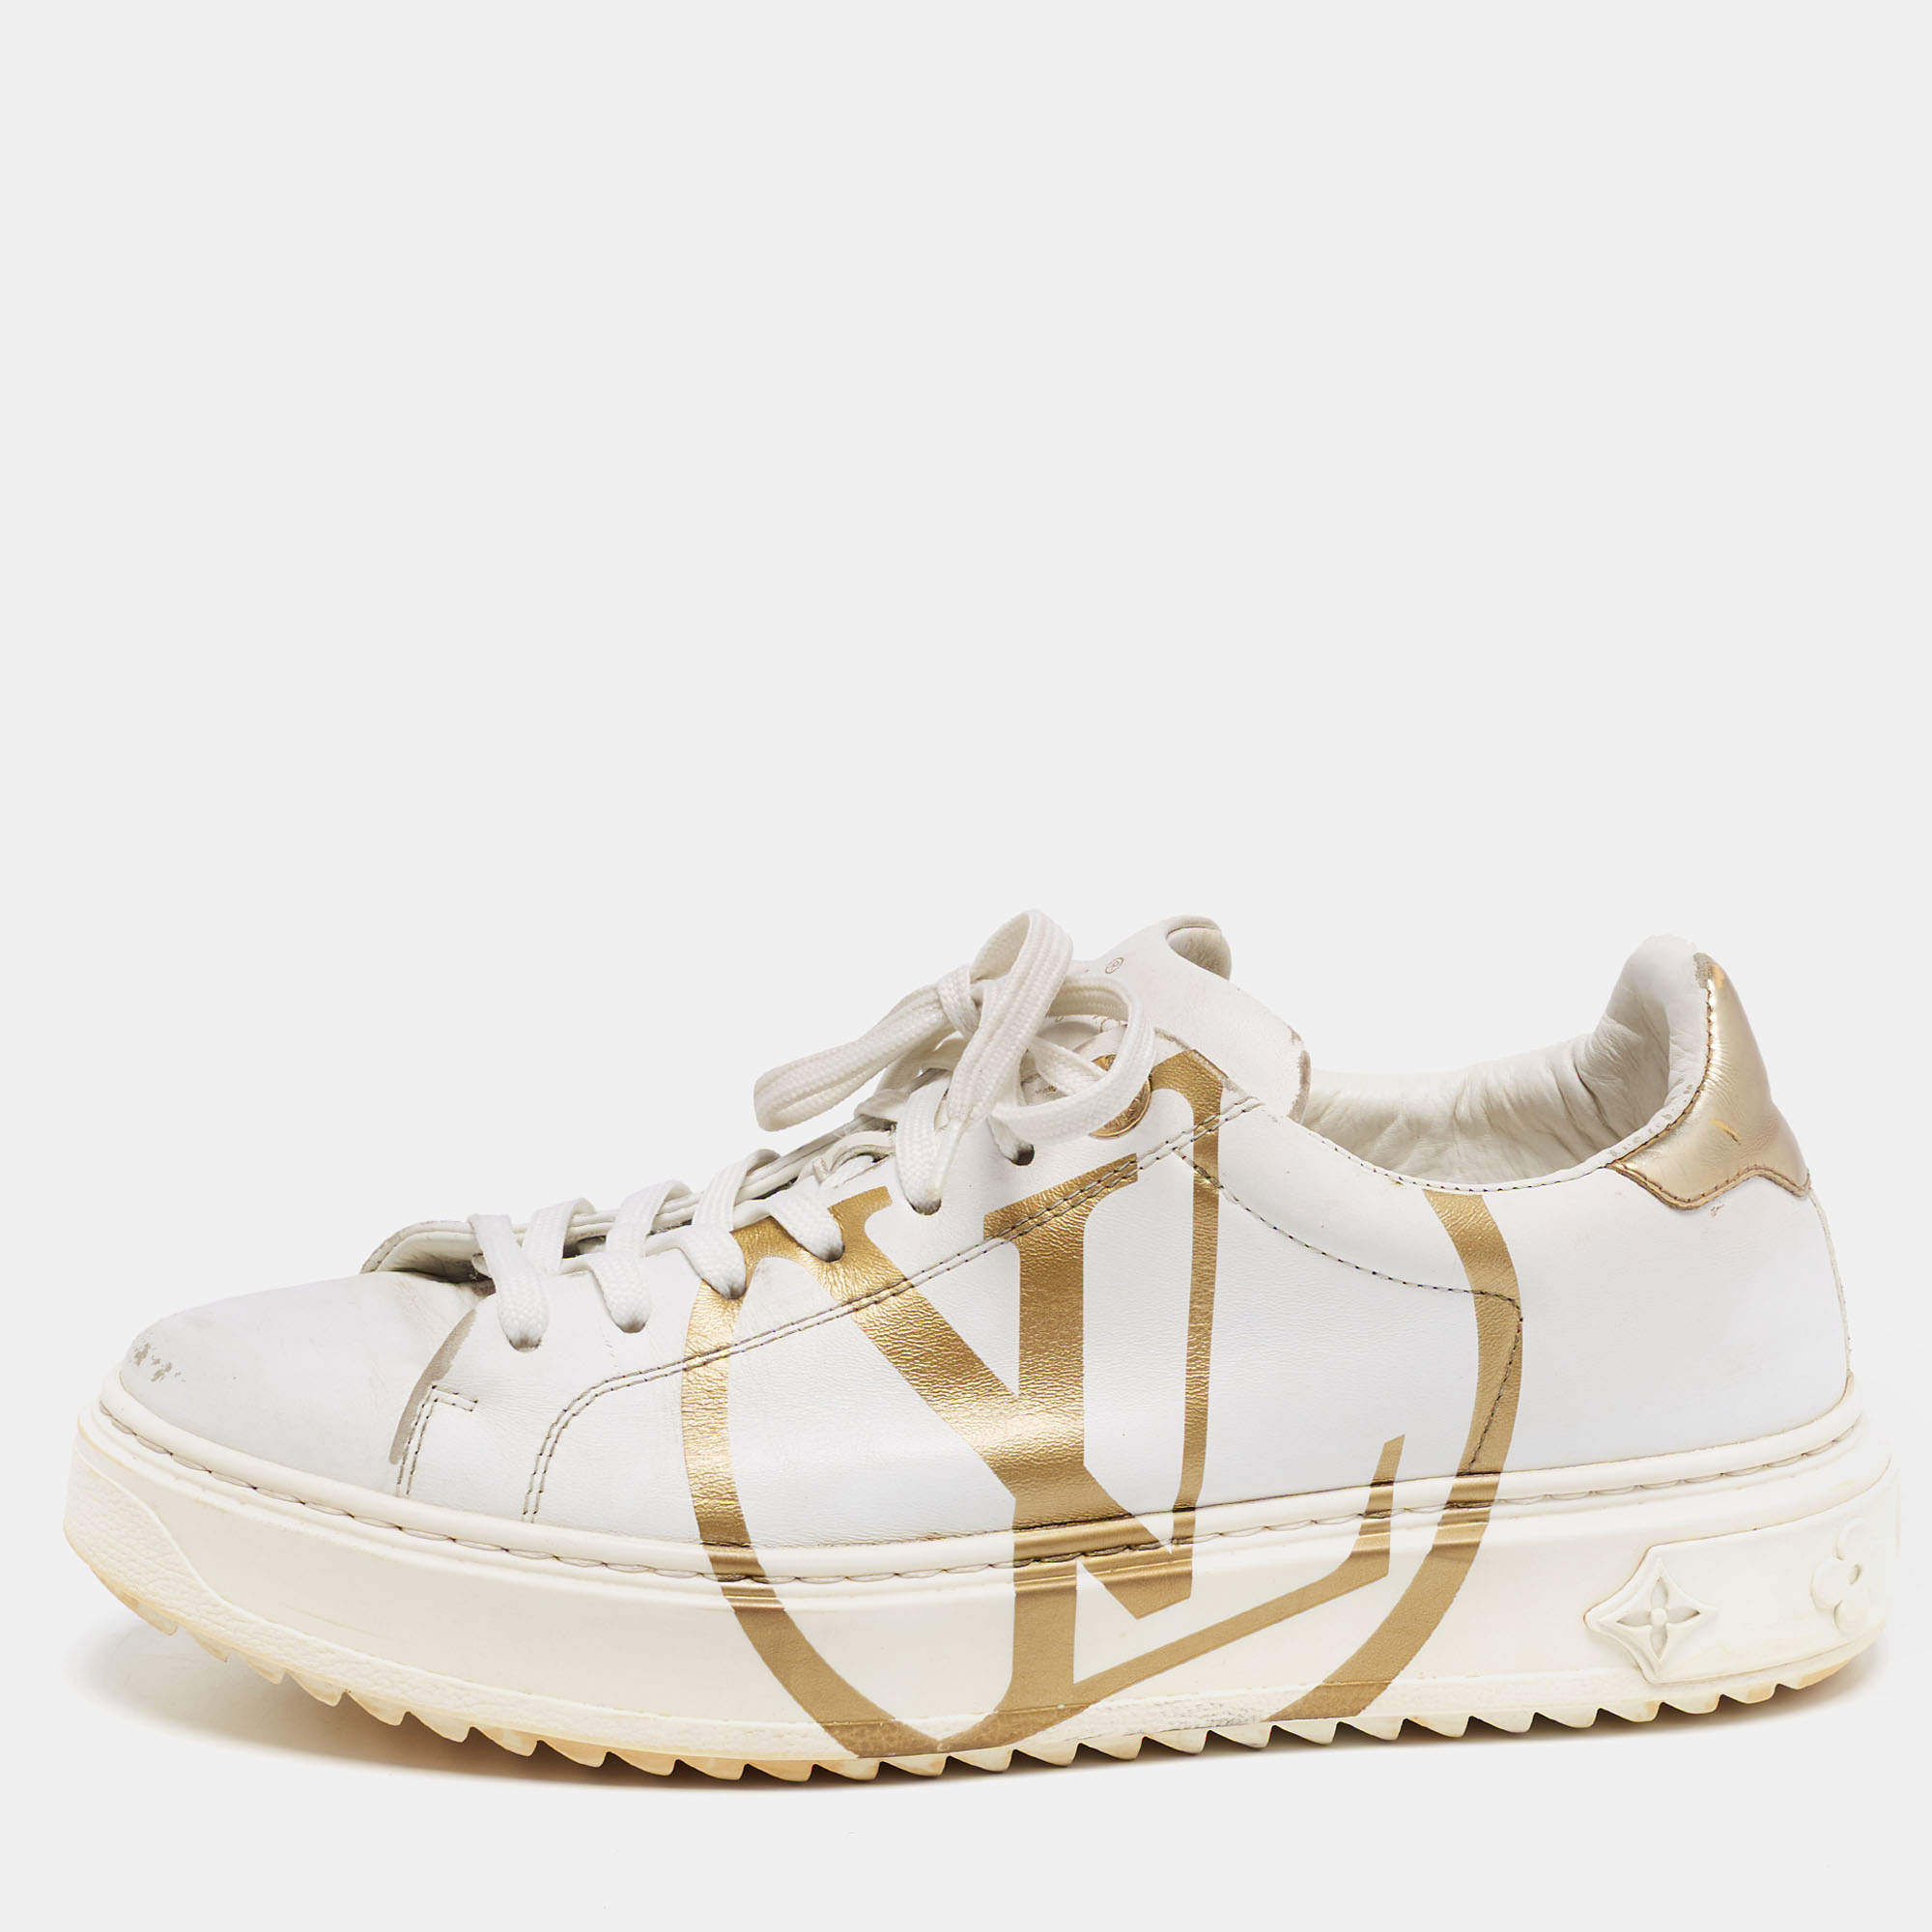 Louis Vuitton Time Out Sneaker Gold. Size 38.0